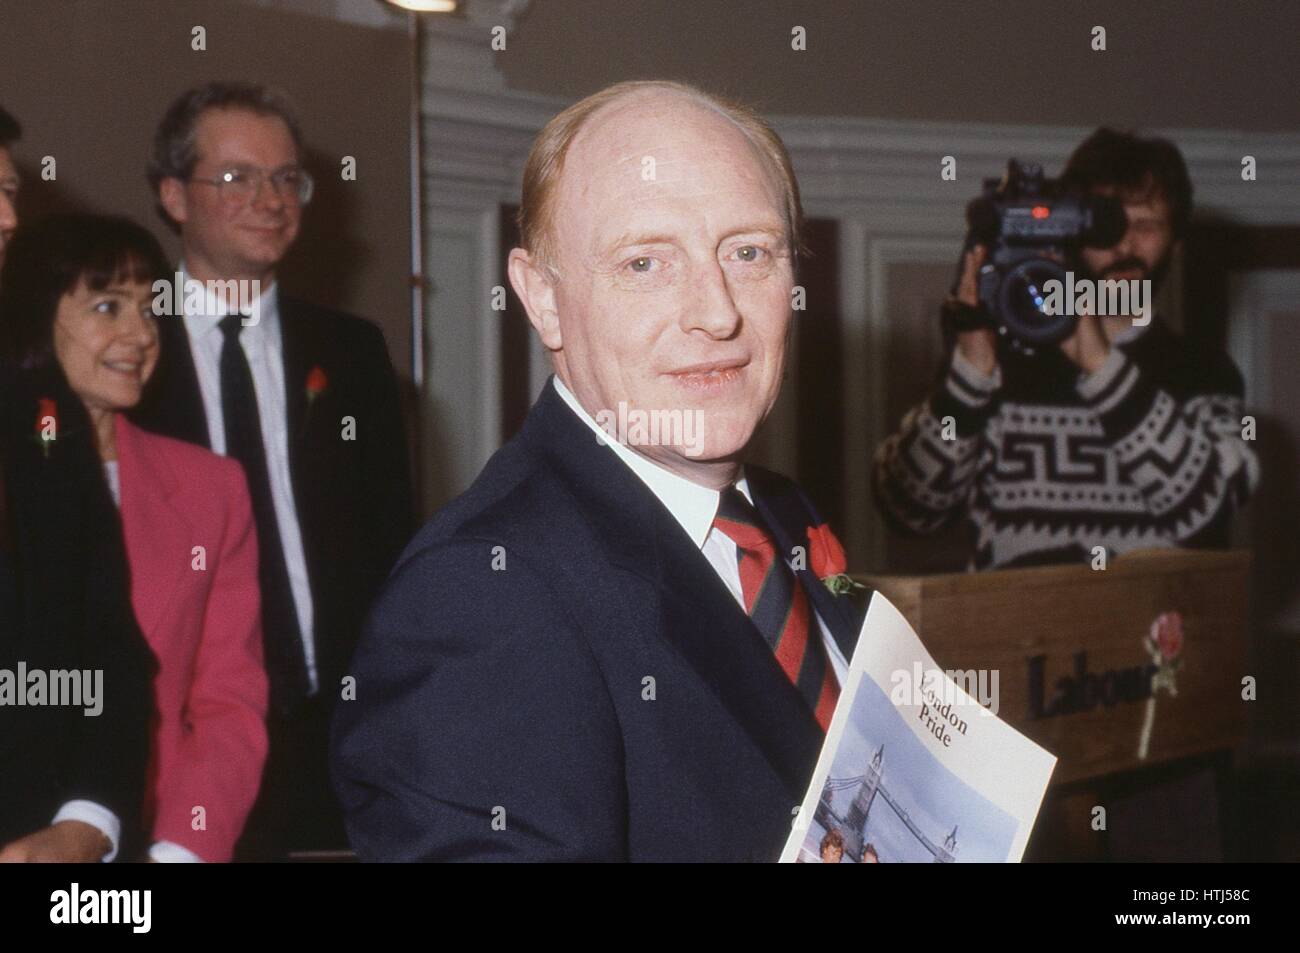 Rt. Hon. Neil Kinnock, Labour party Leader and Member of Parliament for Islwyn, attends a party policy launch in London, England on May 24, 1990. Stock Photo